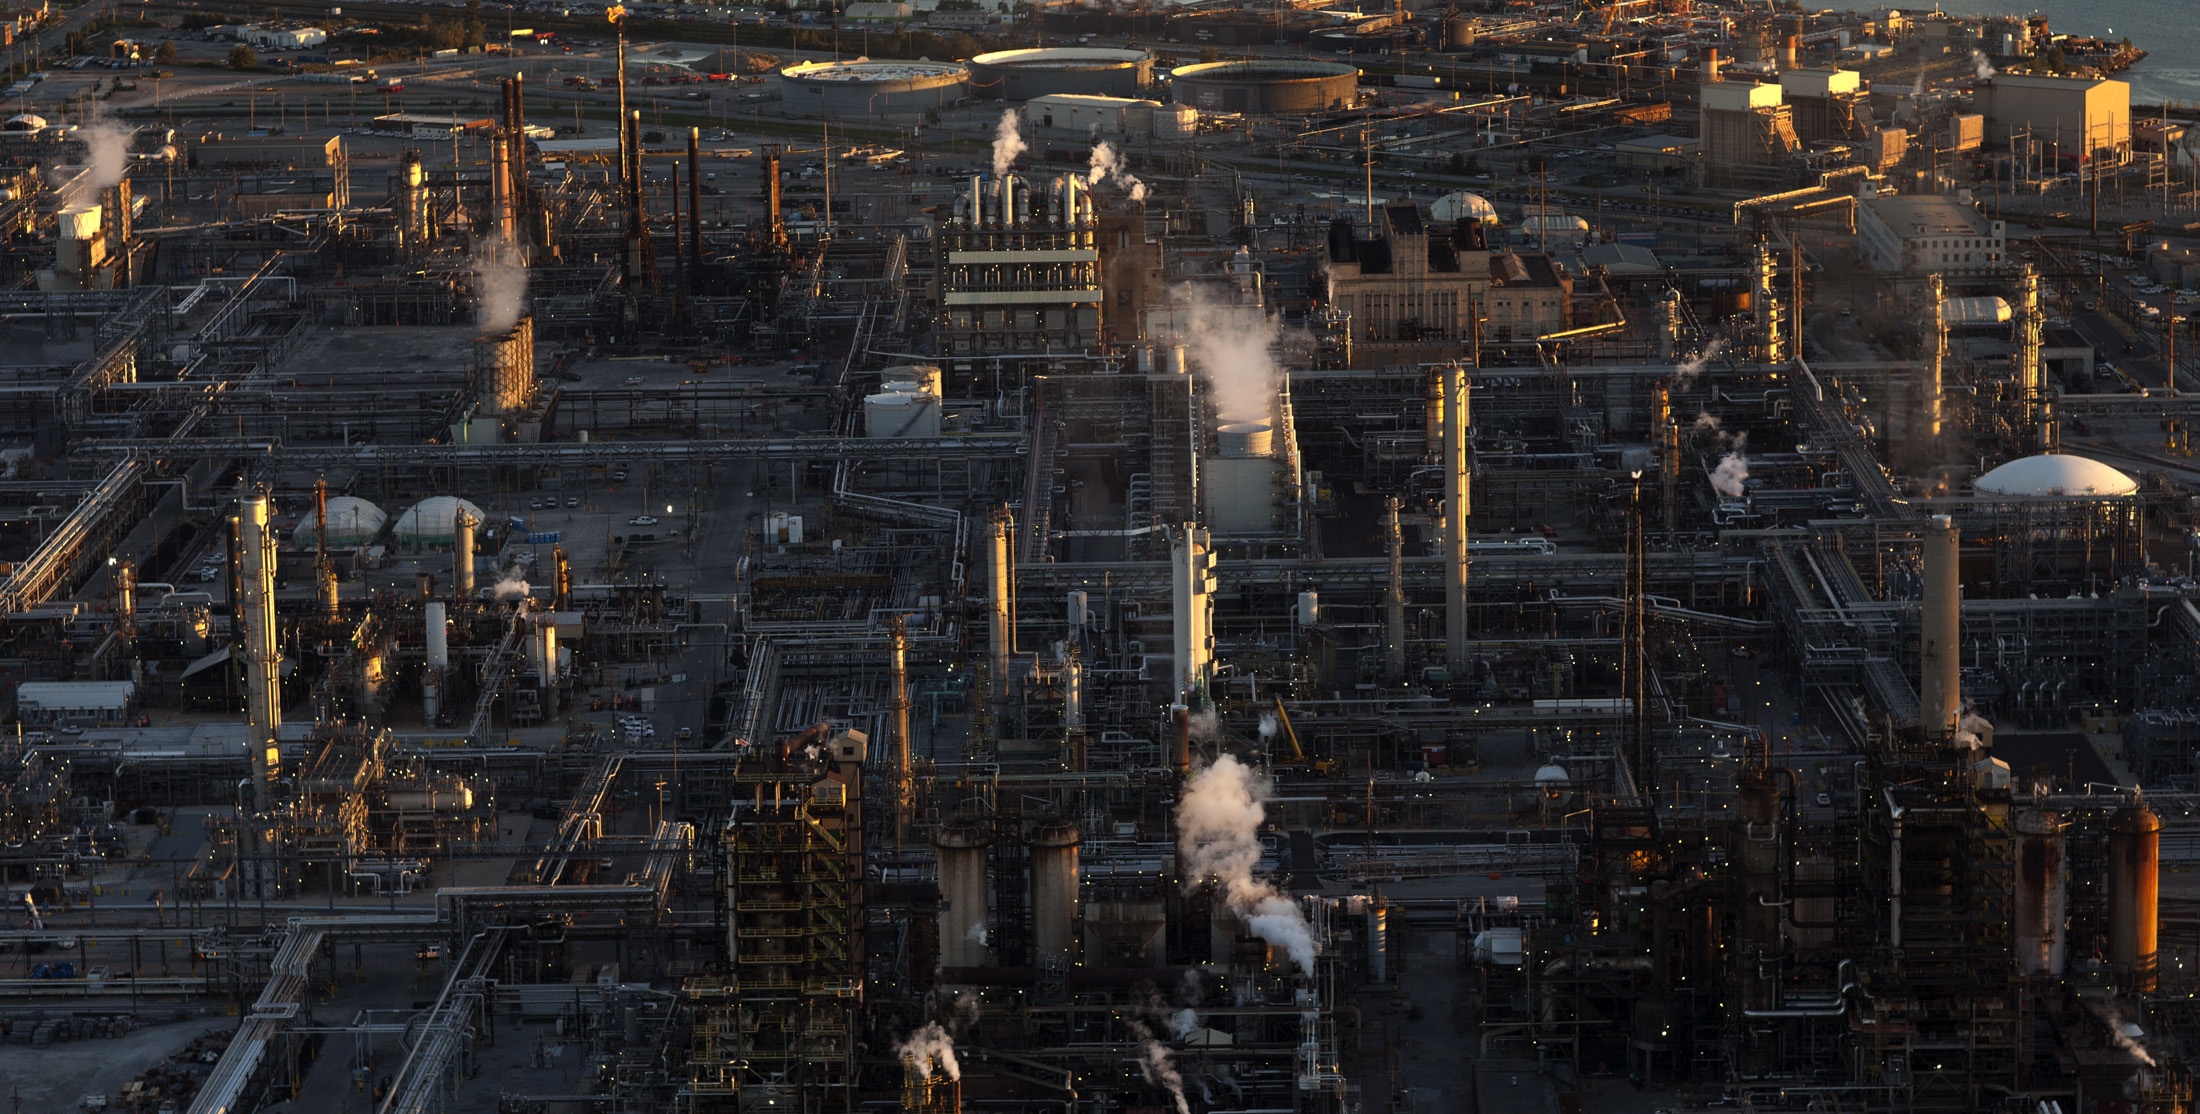 BP Refinery, Whiting, Indiana, 2015